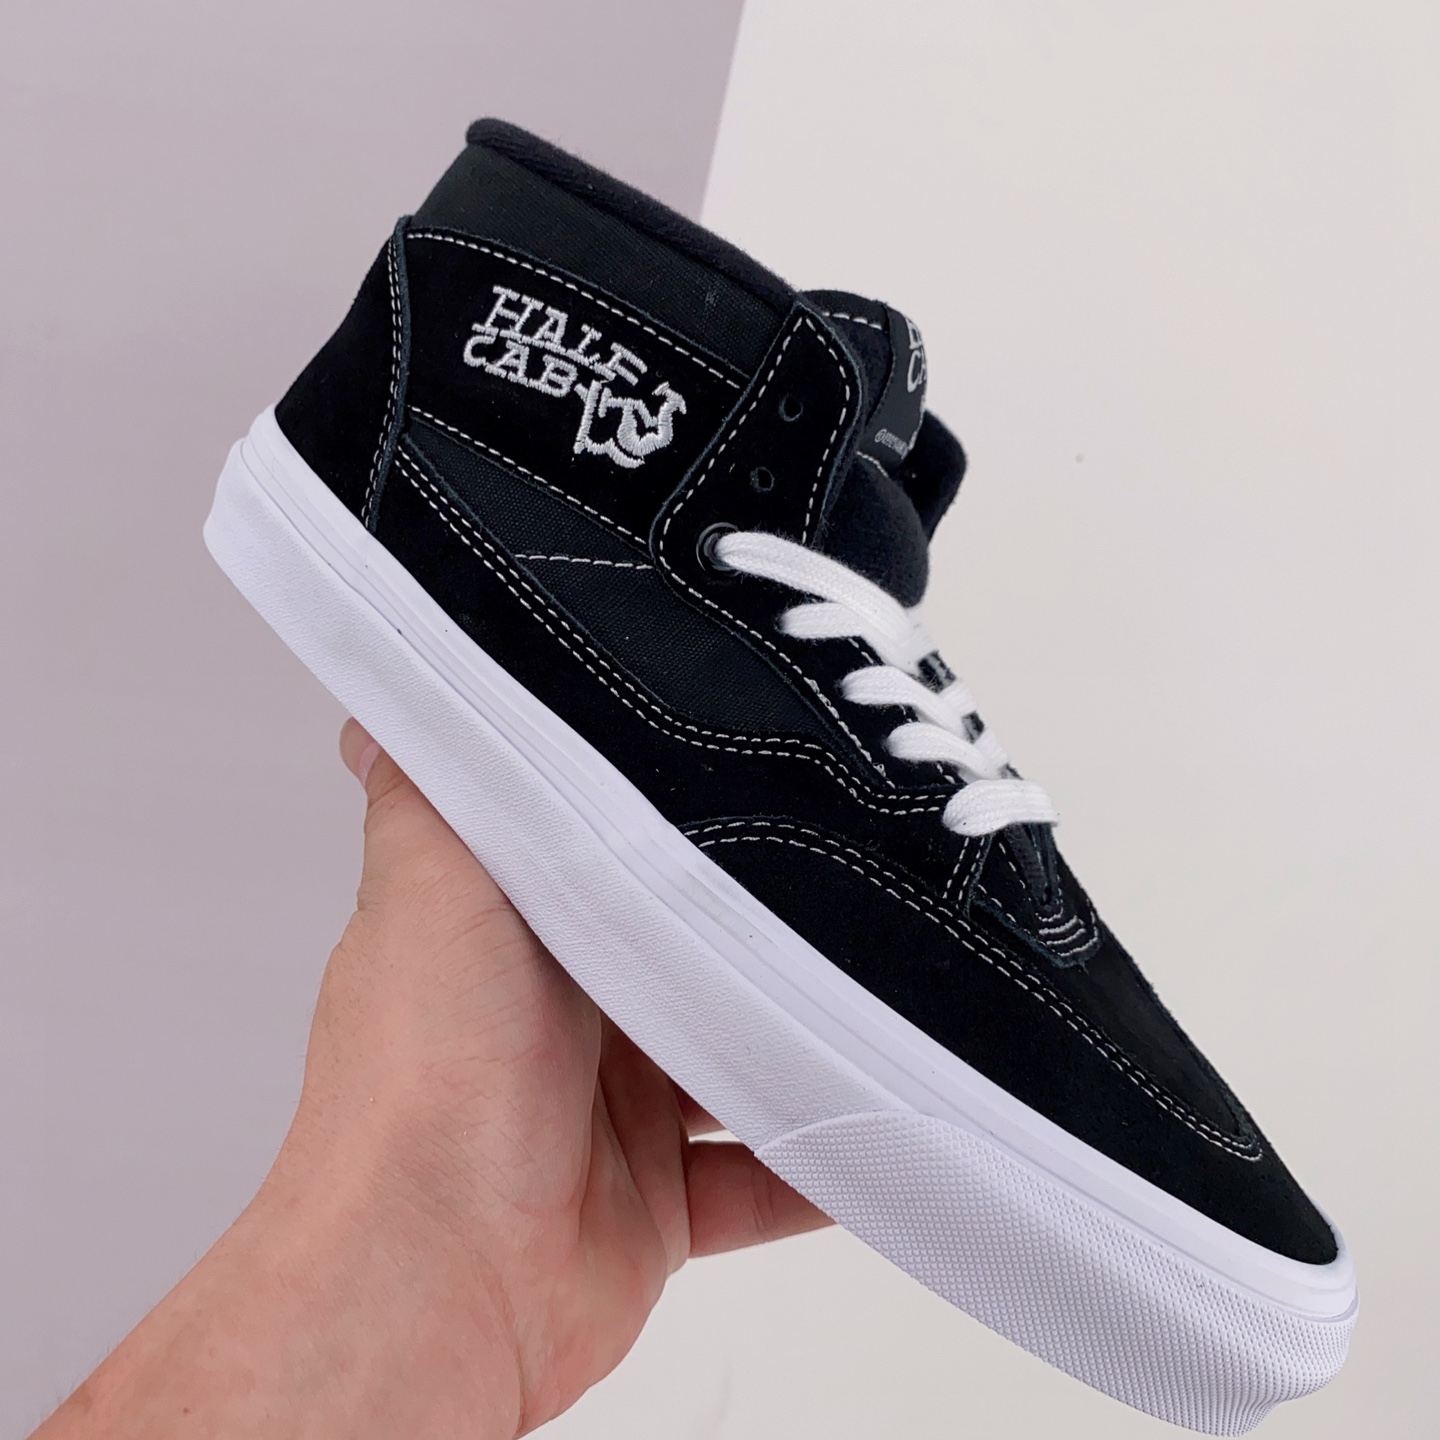 Vans Skate Half Cab Black White - Classic Style and Durability